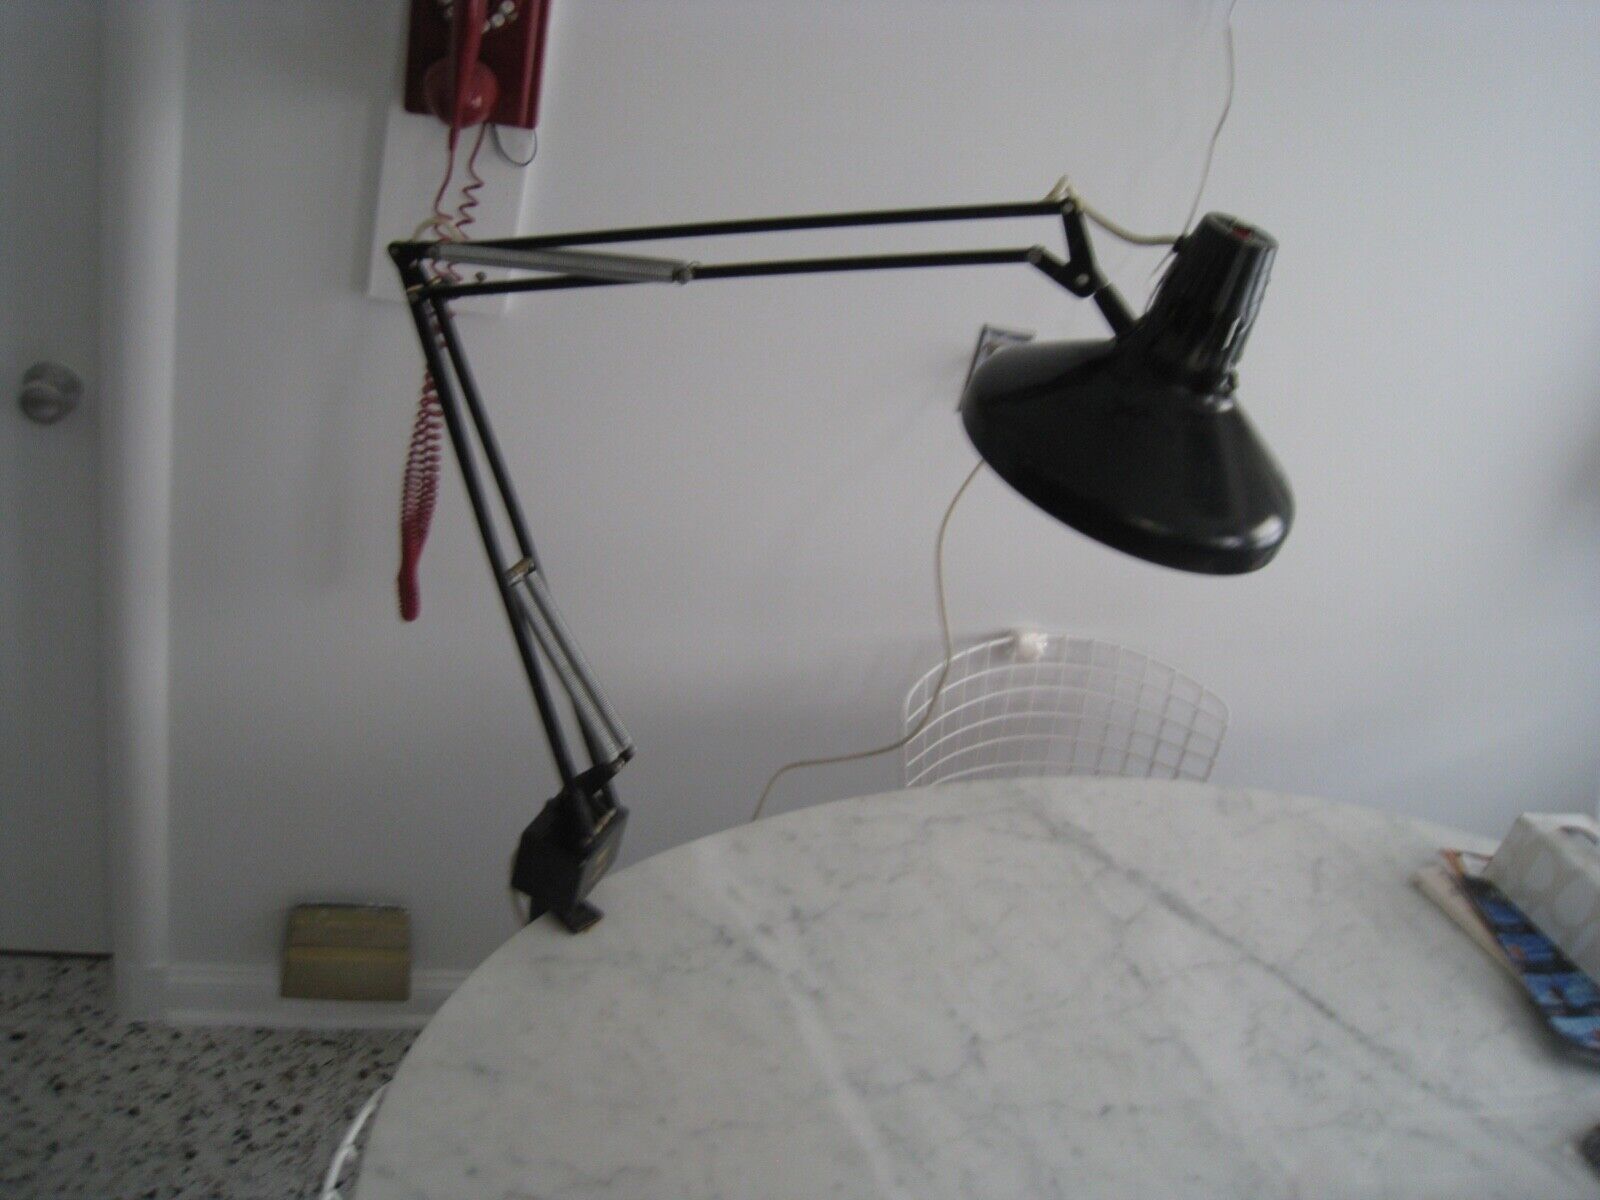 Vintage Black Desk Luxo Lamp And Clamp Color Correct Articulated Metal